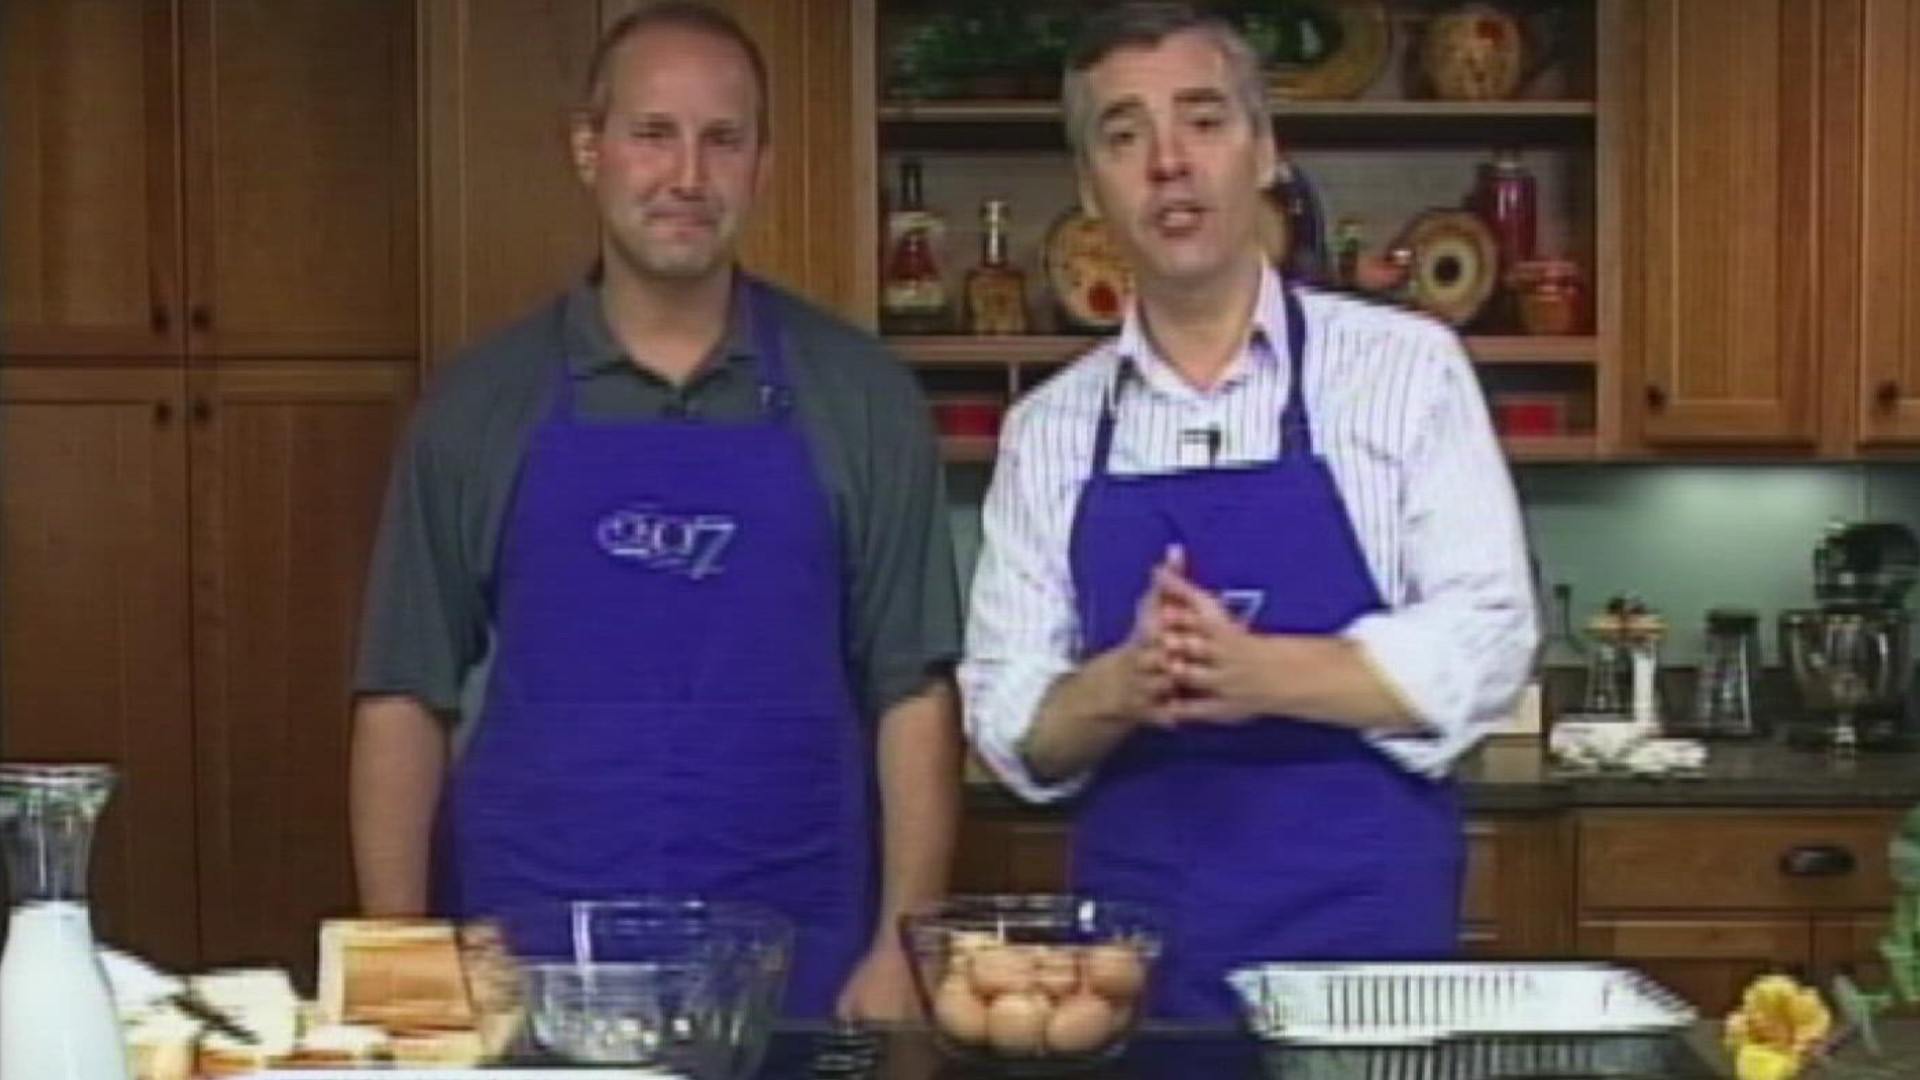 Lee Goldberg makes his mom's baked french toast in this 207 cooking segment from 2007.